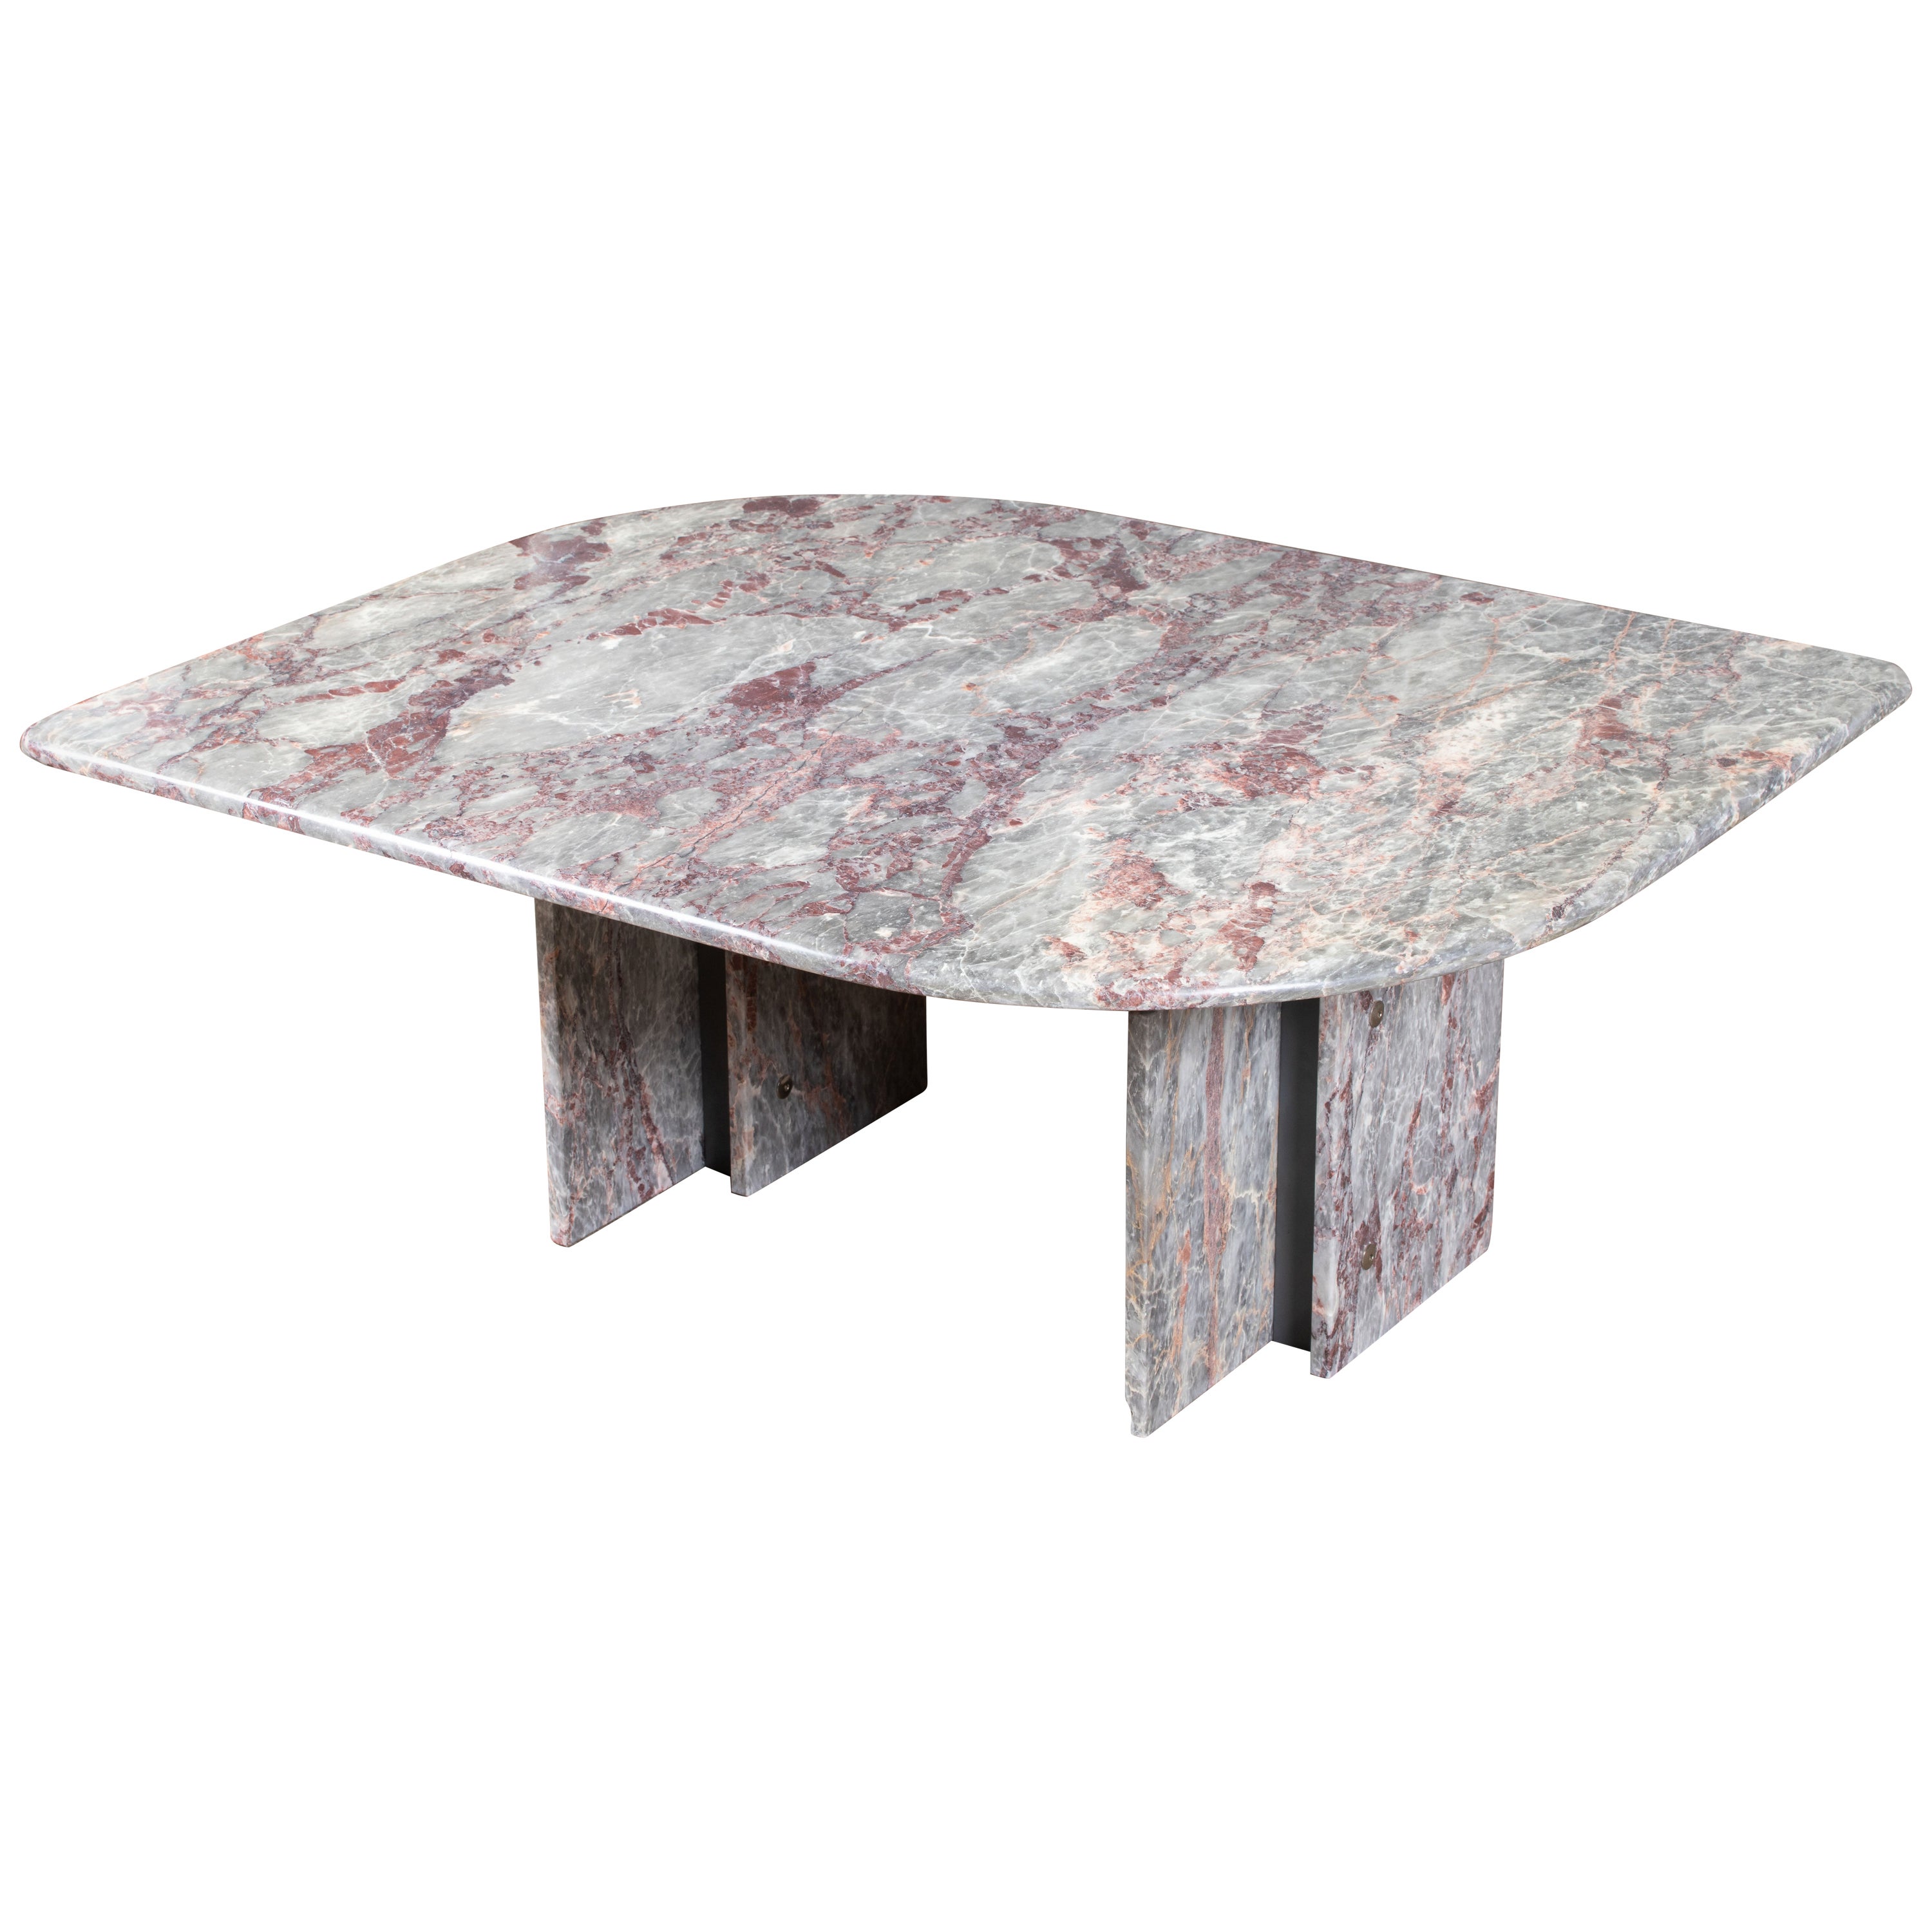 Italian Design Marble Coffee Table, 1970 For Sale